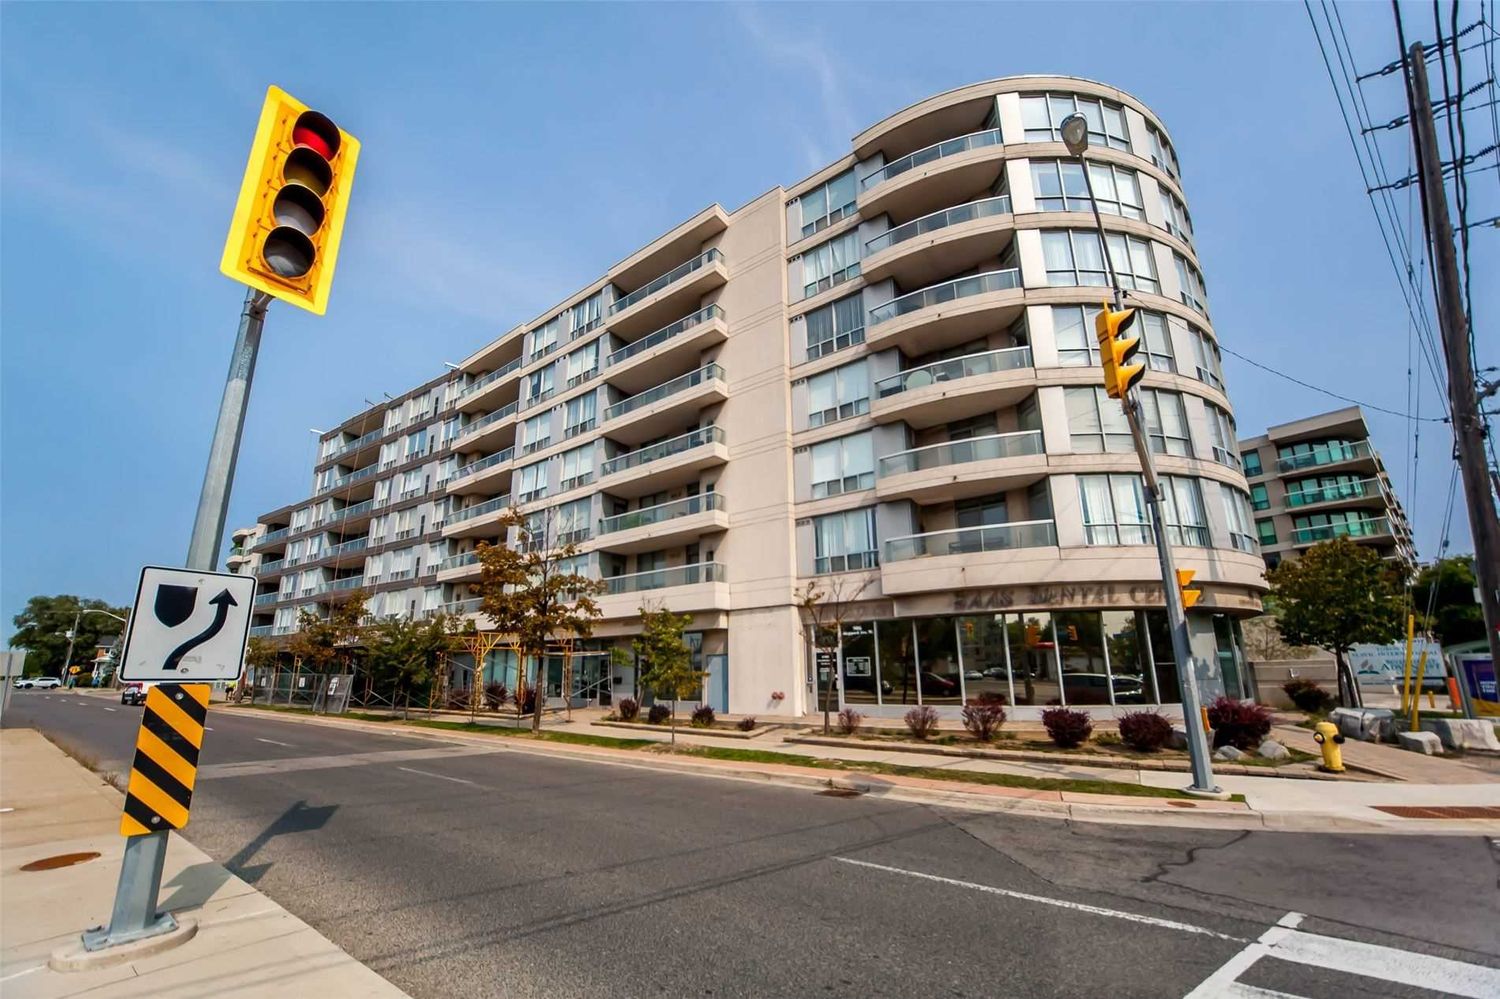 906 Sheppard Avenue W. Terrace Heights III Condos is located in  North York, Toronto - image #1 of 2